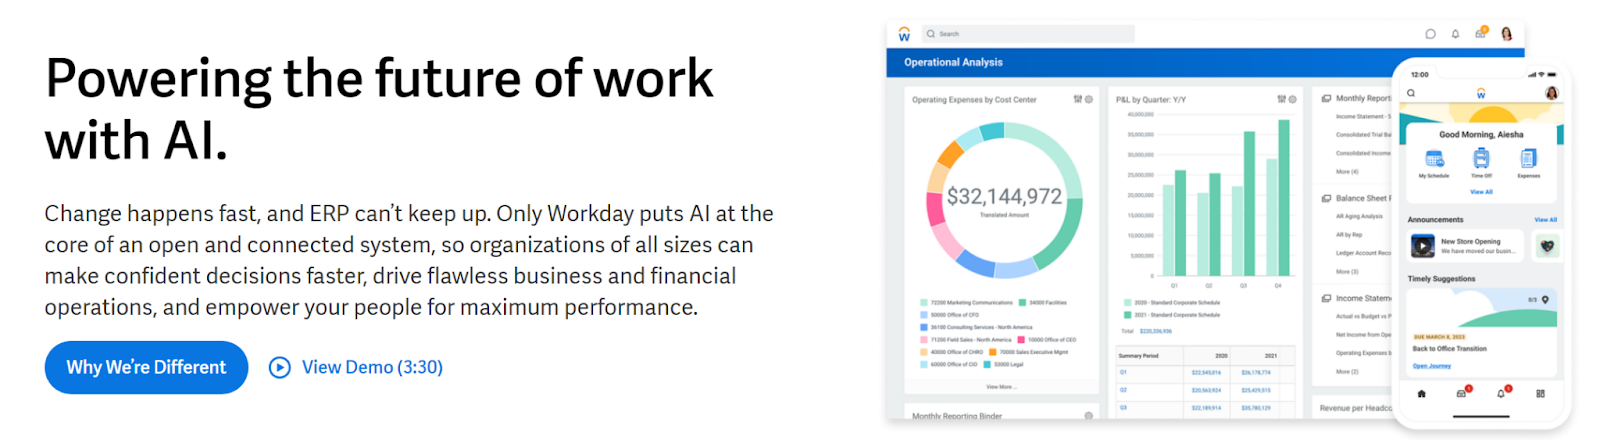 image showing workday as one of the best performance management tools